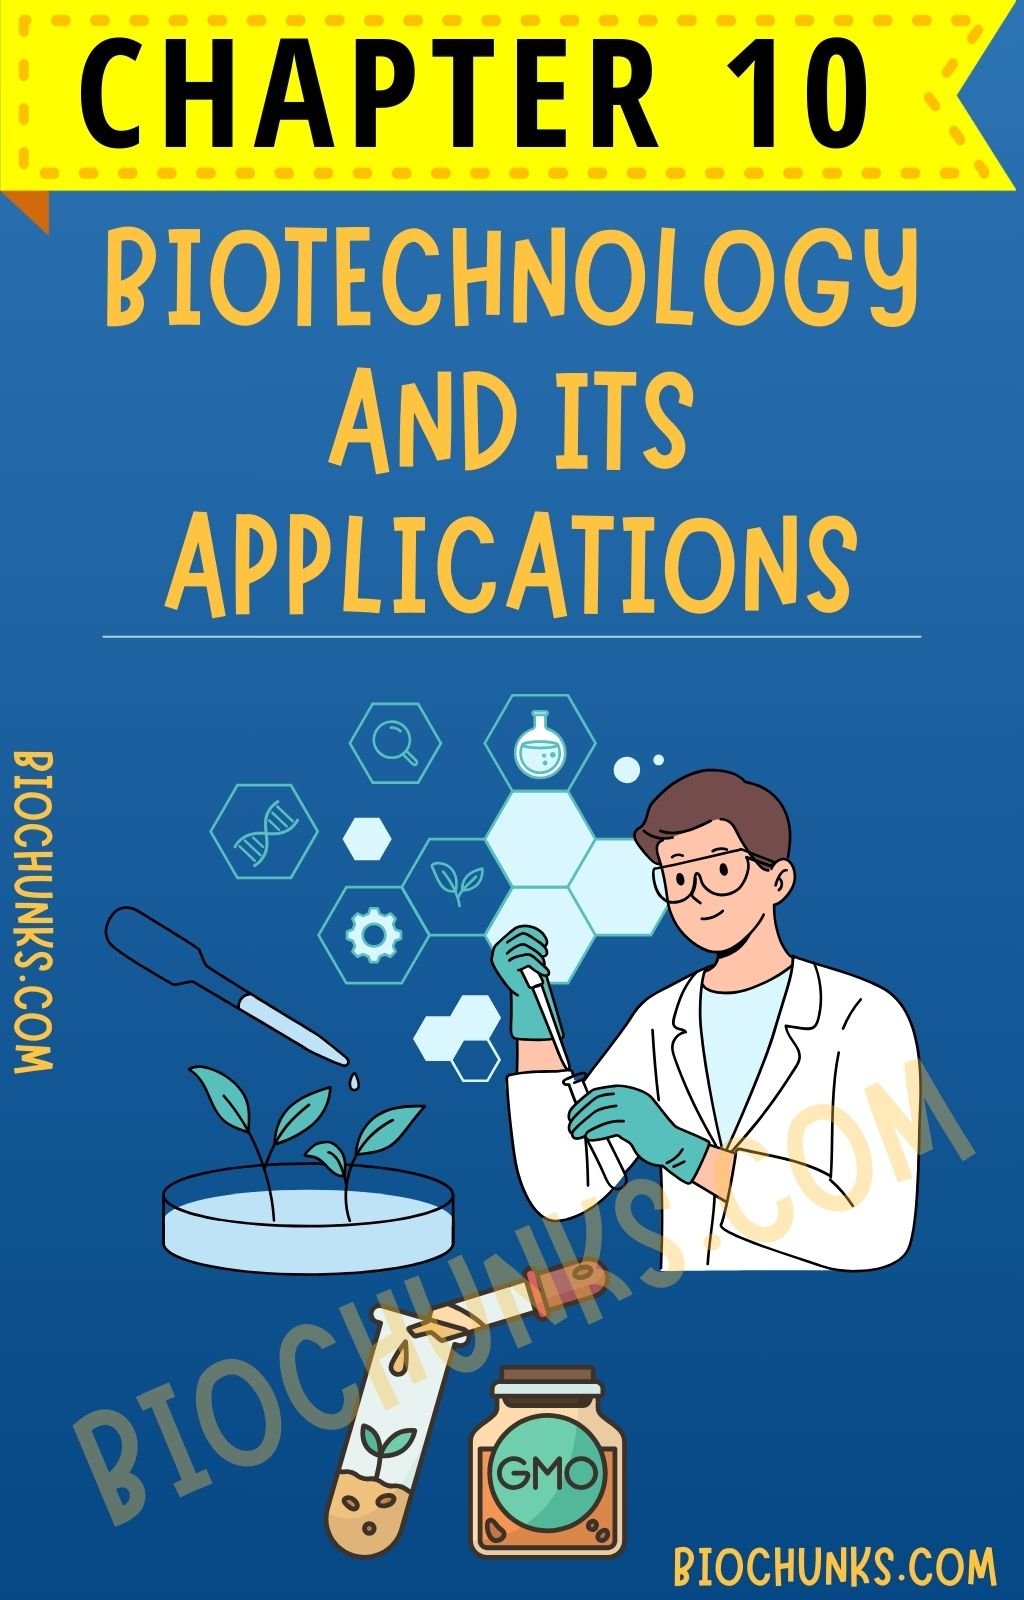 Biotechnology and its Applications Chapter 10 Class 12th biochunks.com